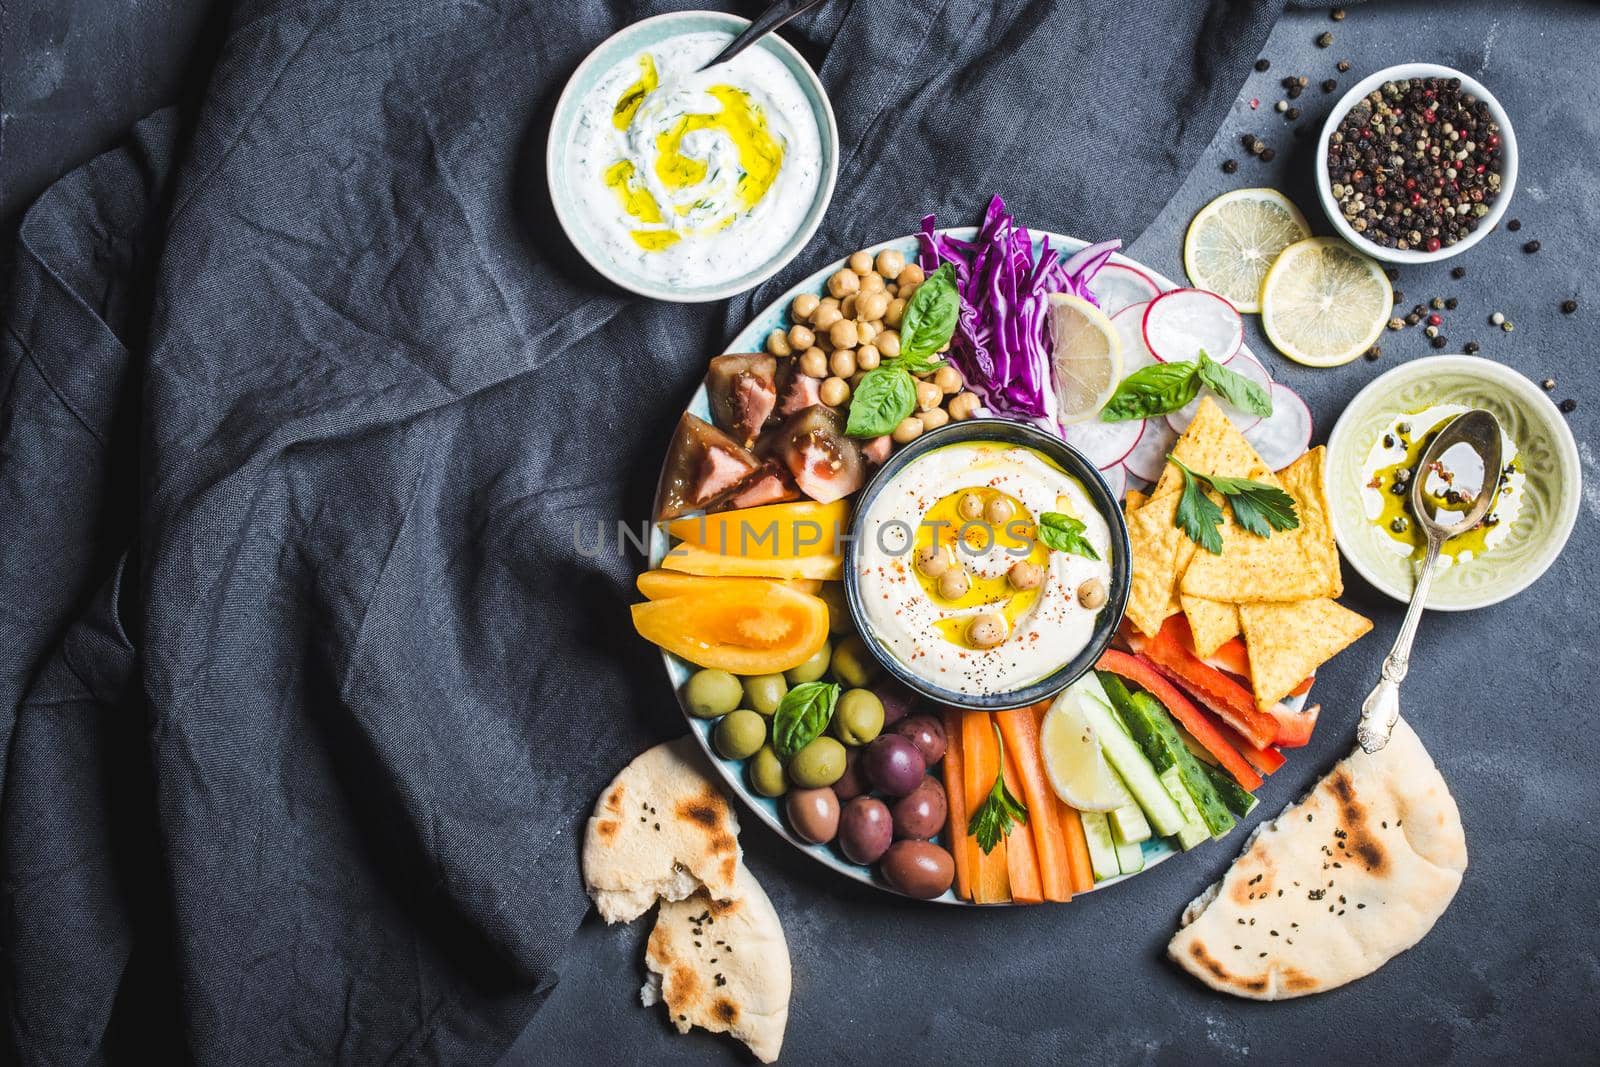 Hummus platter with assorted snacks by its_al_dente